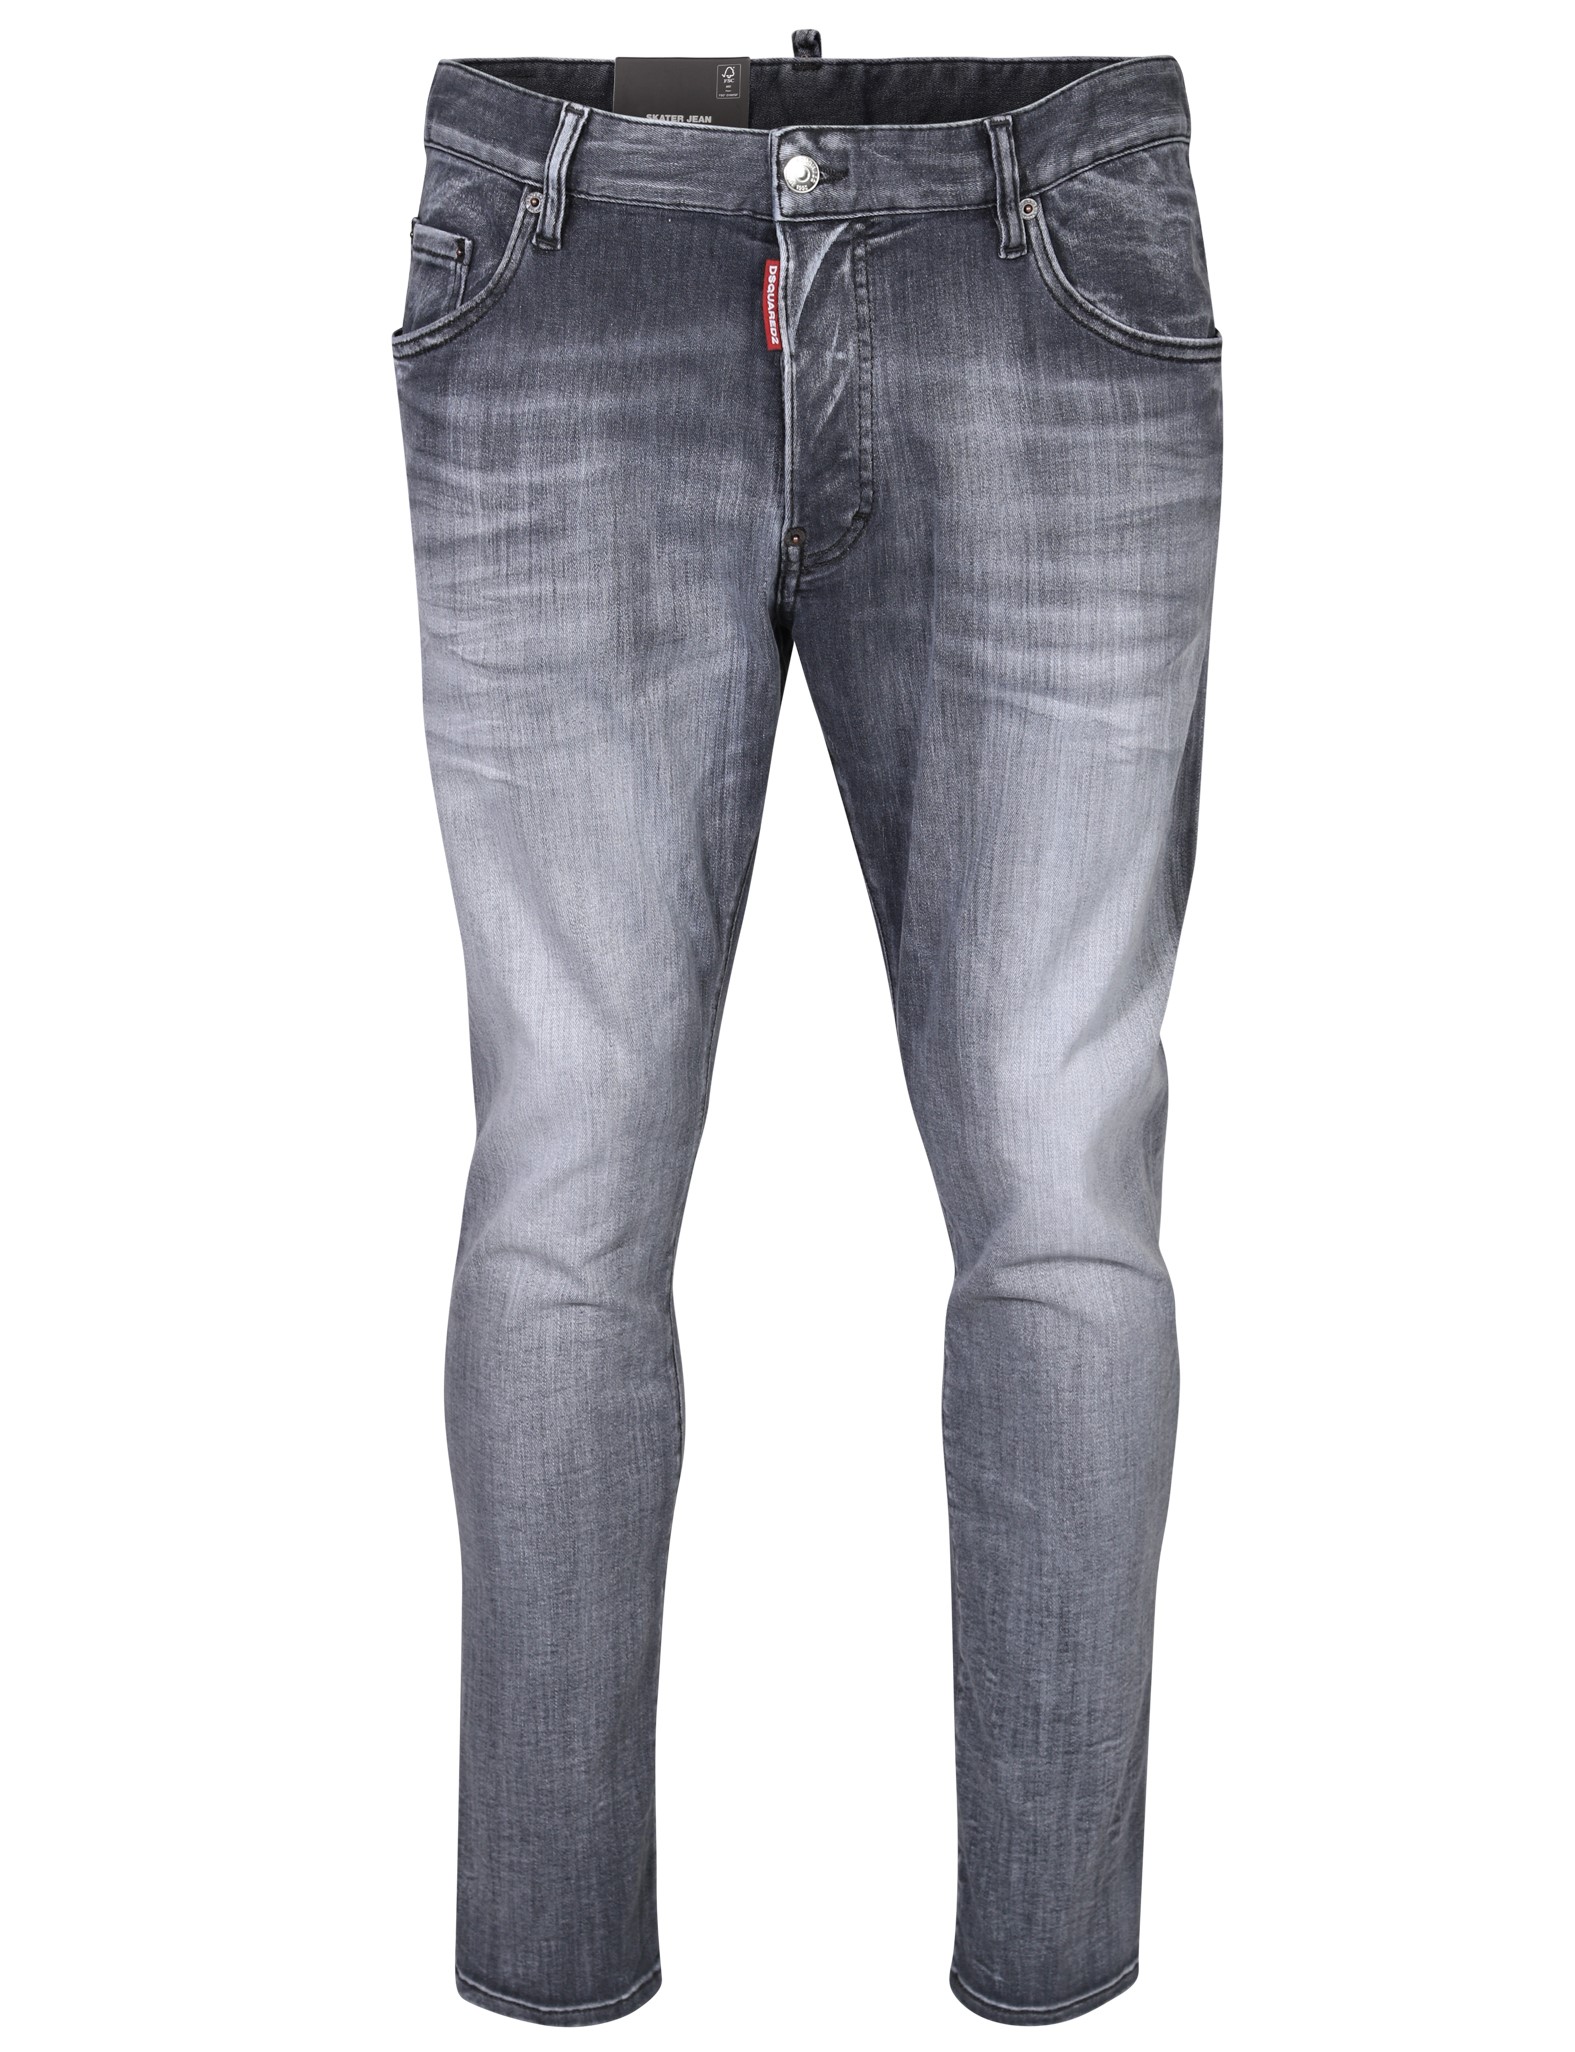 DSQUARED2 Skater Jeans in Washed Grey 46